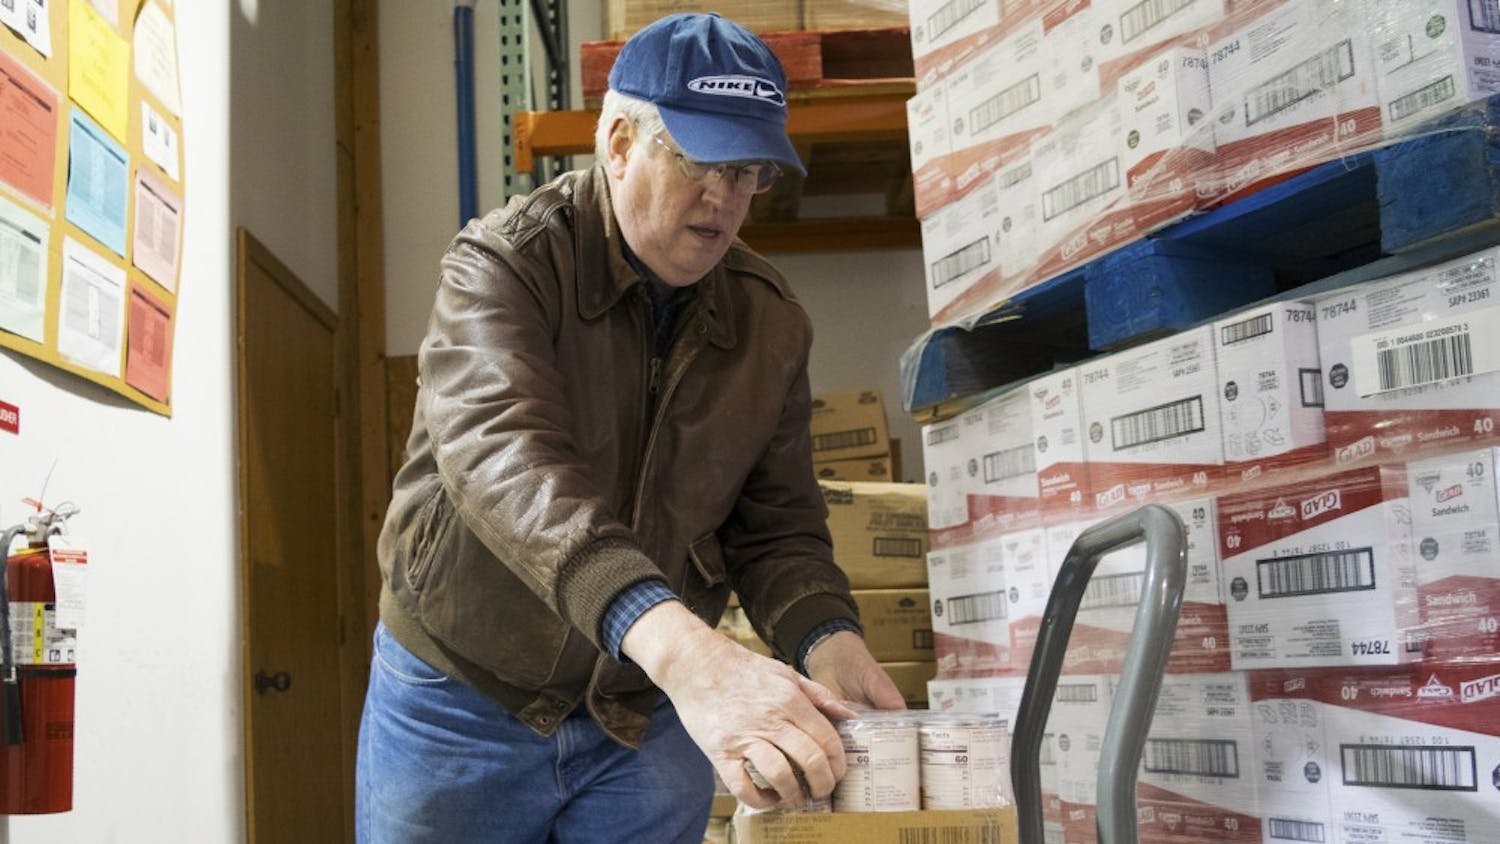 First United Methodist Church volunteer Steve Ulrey unloads cans of peaches on Wednesday at the Hoosier Hills Food Bank. The food bank serves six counties, including Monroe County, and will celebrate its 35th anniversary on Saturday.